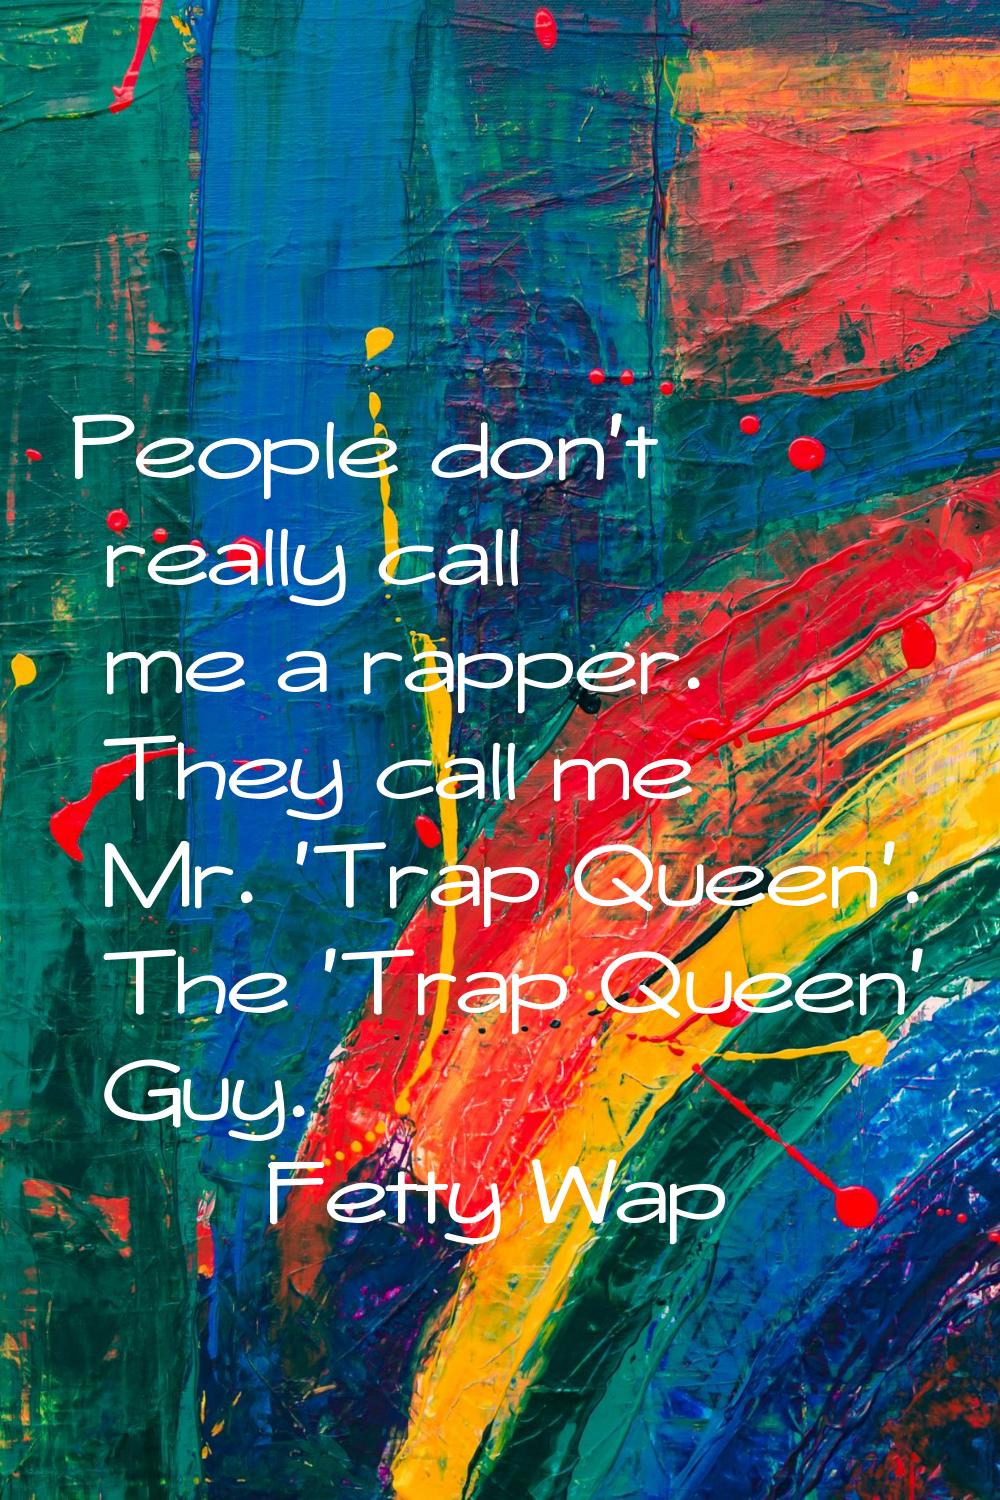 People don't really call me a rapper. They call me Mr. 'Trap Queen'. The 'Trap Queen' Guy.